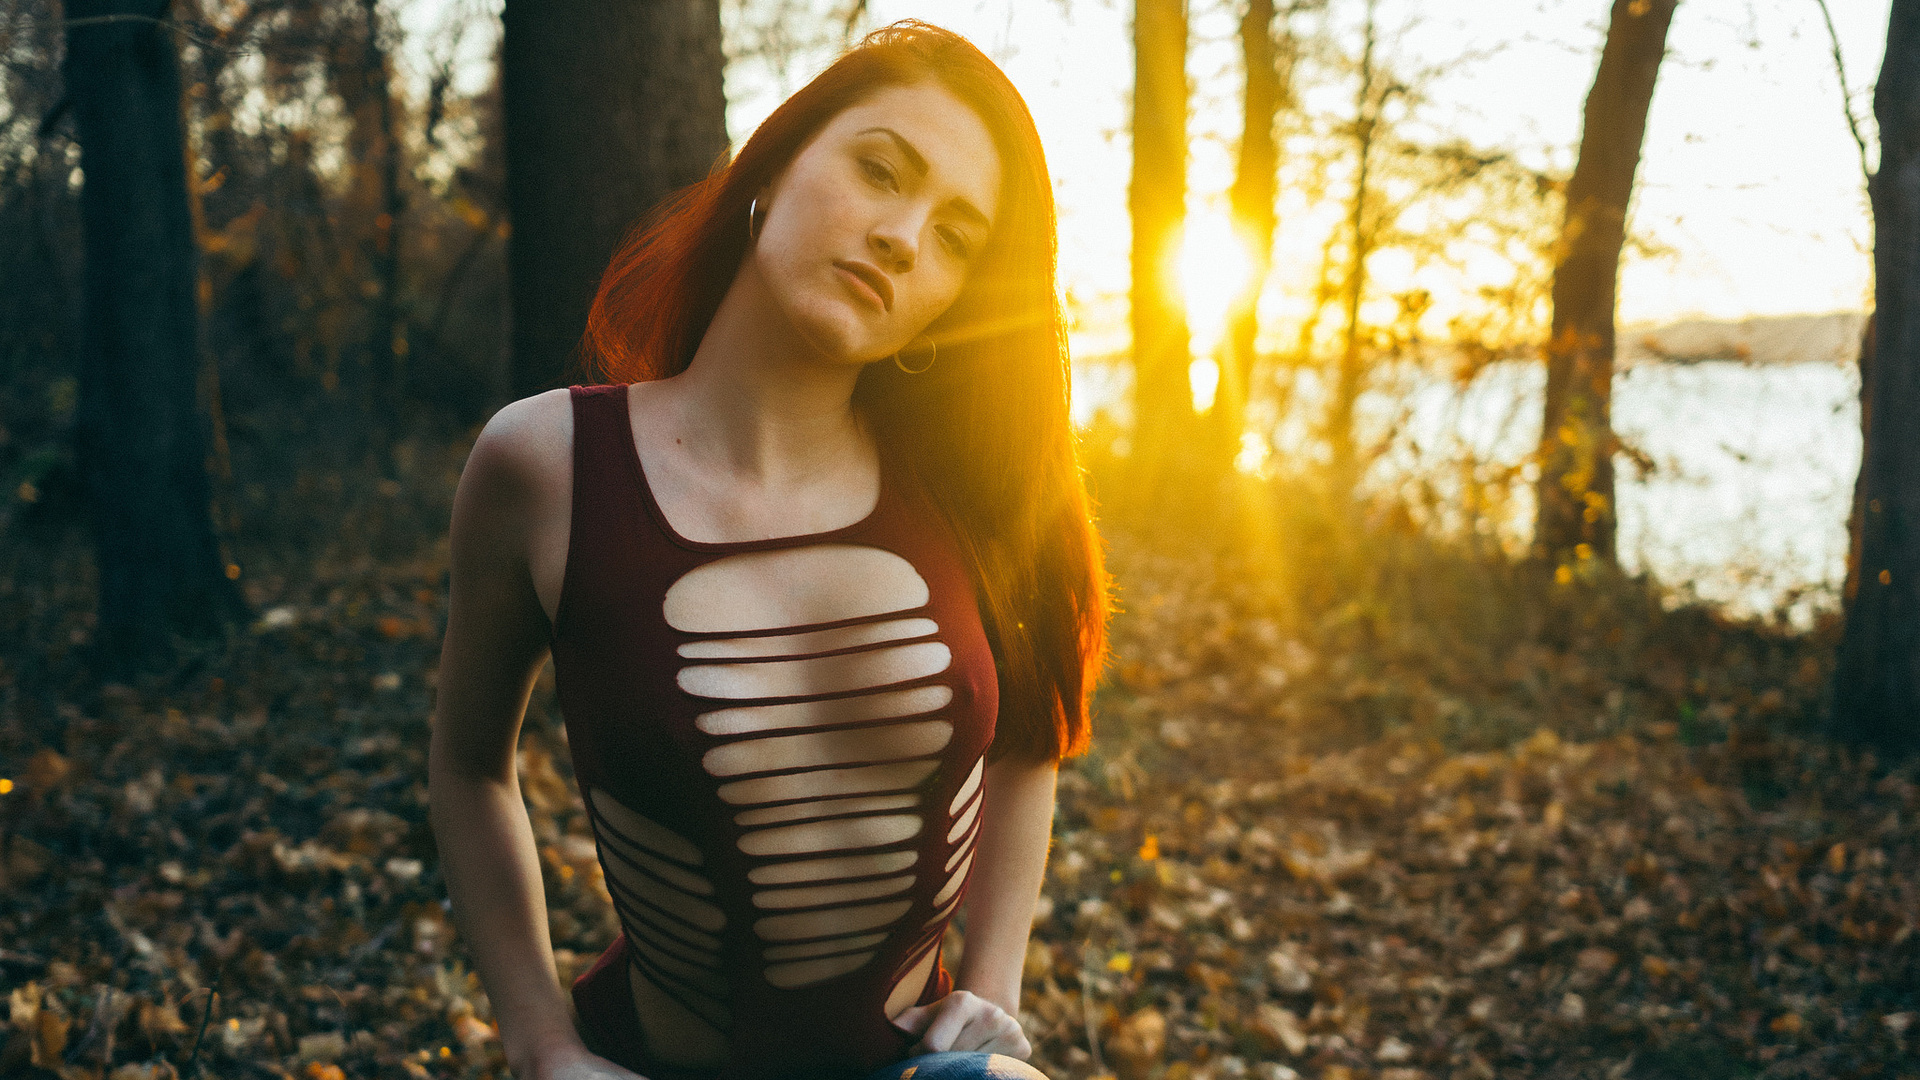 women, portrait, sunset, trees, boobs, torn jeans, sitting, leaves, women outdoors, depth of field, nipple through clothing